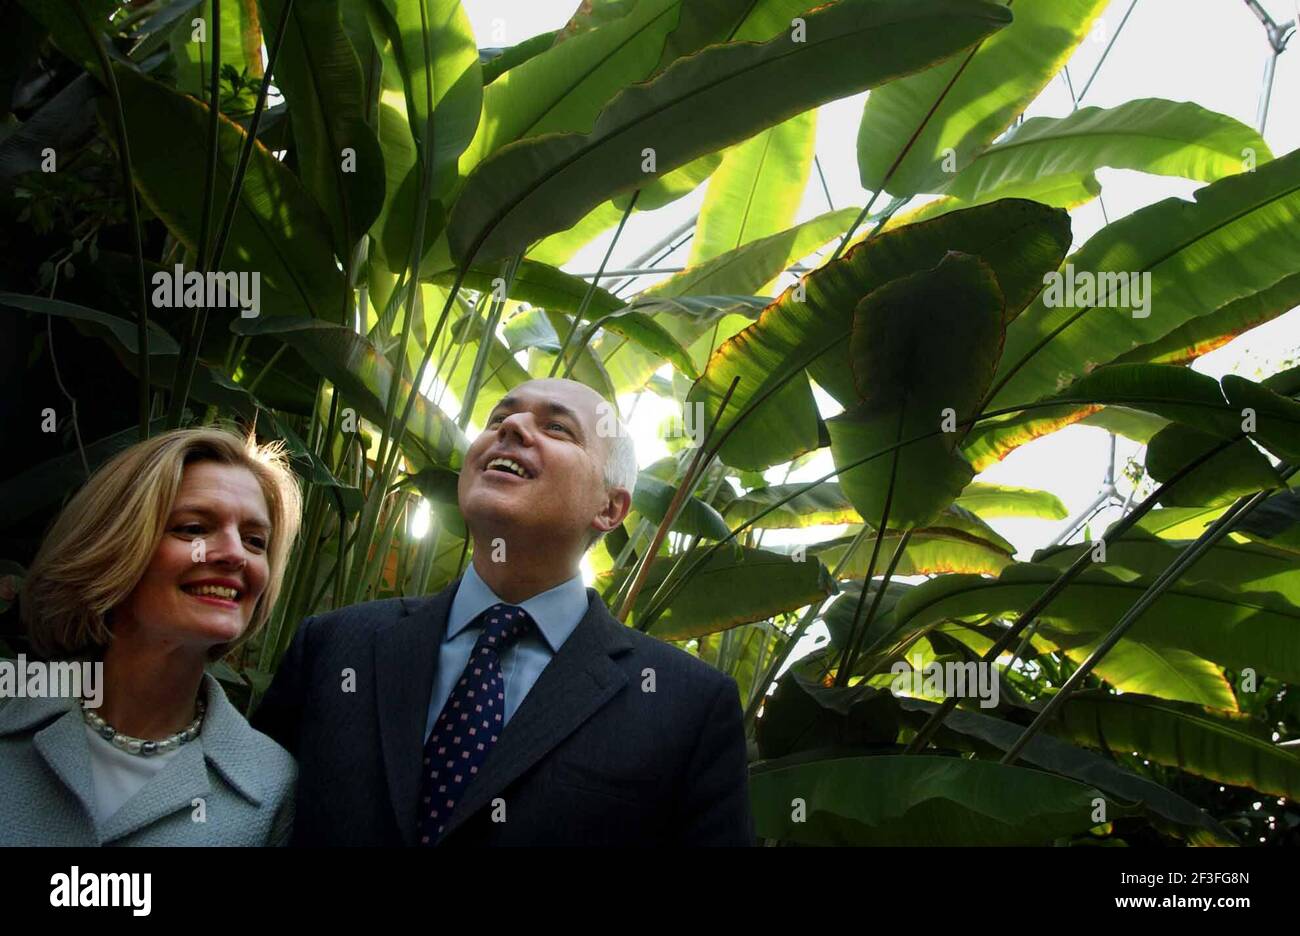 iain duncan smith AND HIS WIFE BETSY ON A VISIT TO THE EDEN PROJECT IN CORNWALL.16/10/03 PILSTON Stock Photo